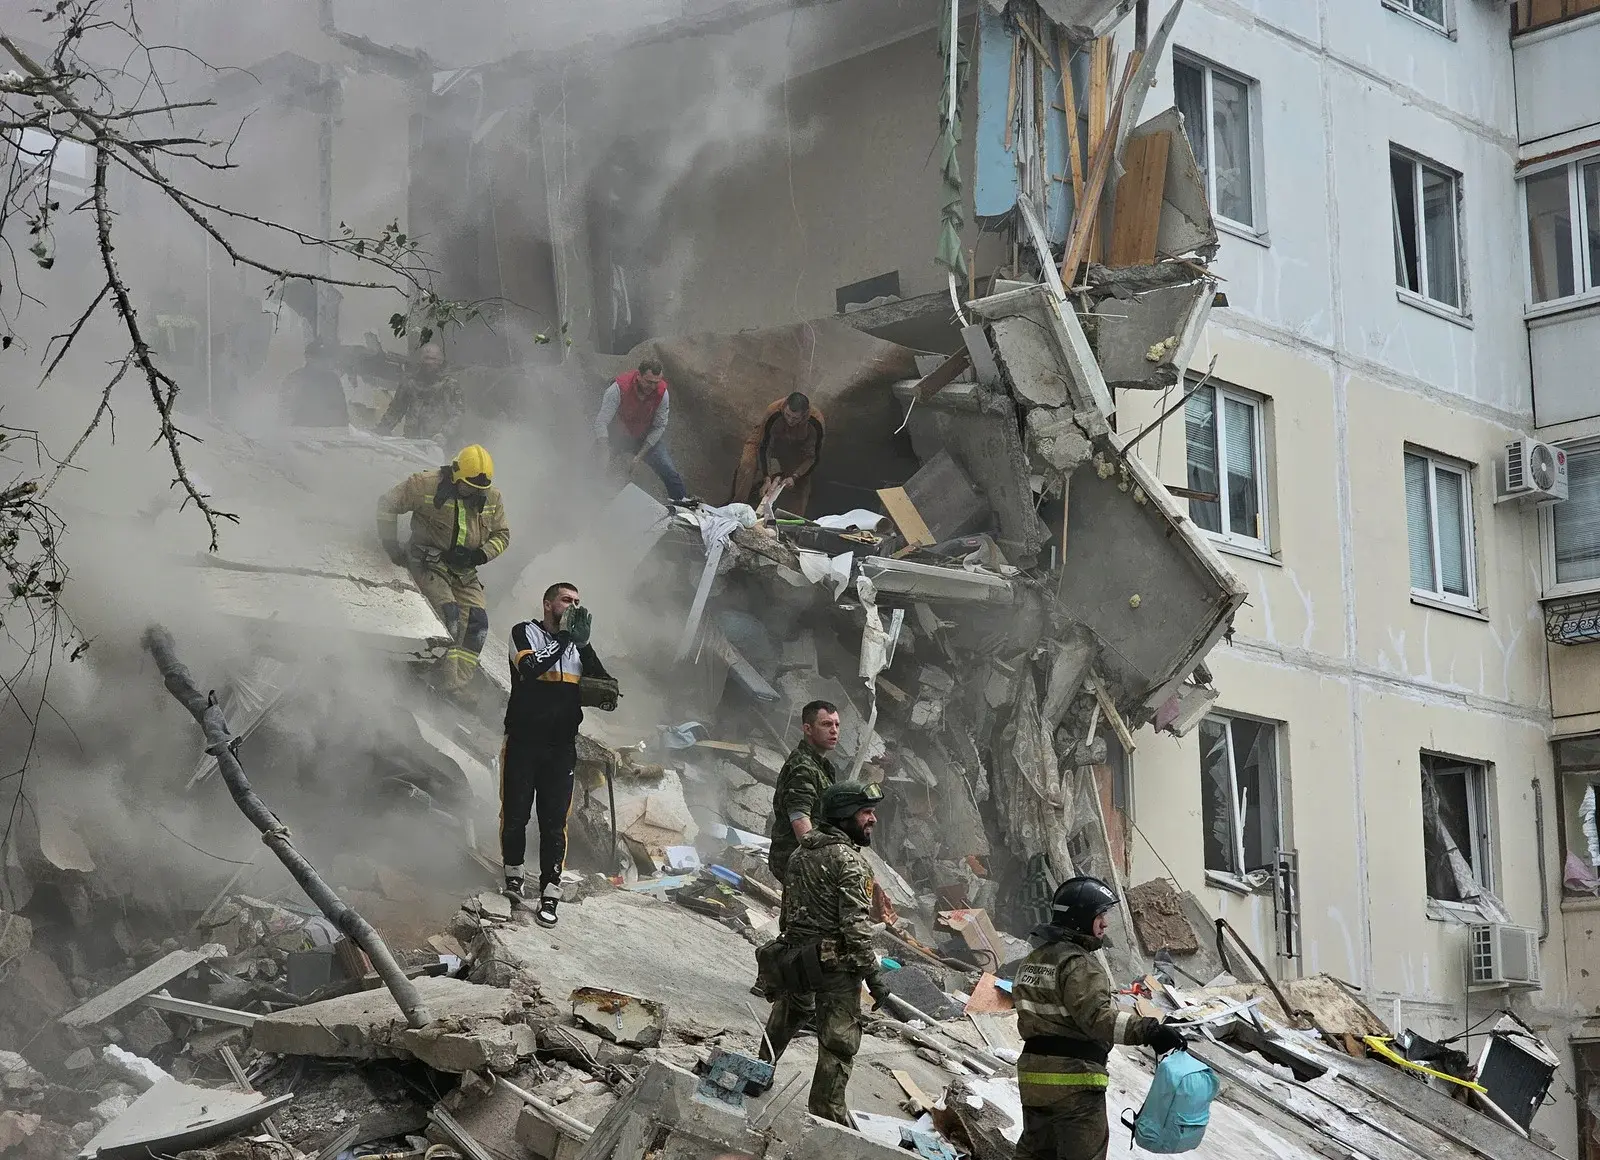 At least 7 killed as building collapses in Russia’s Belgorod